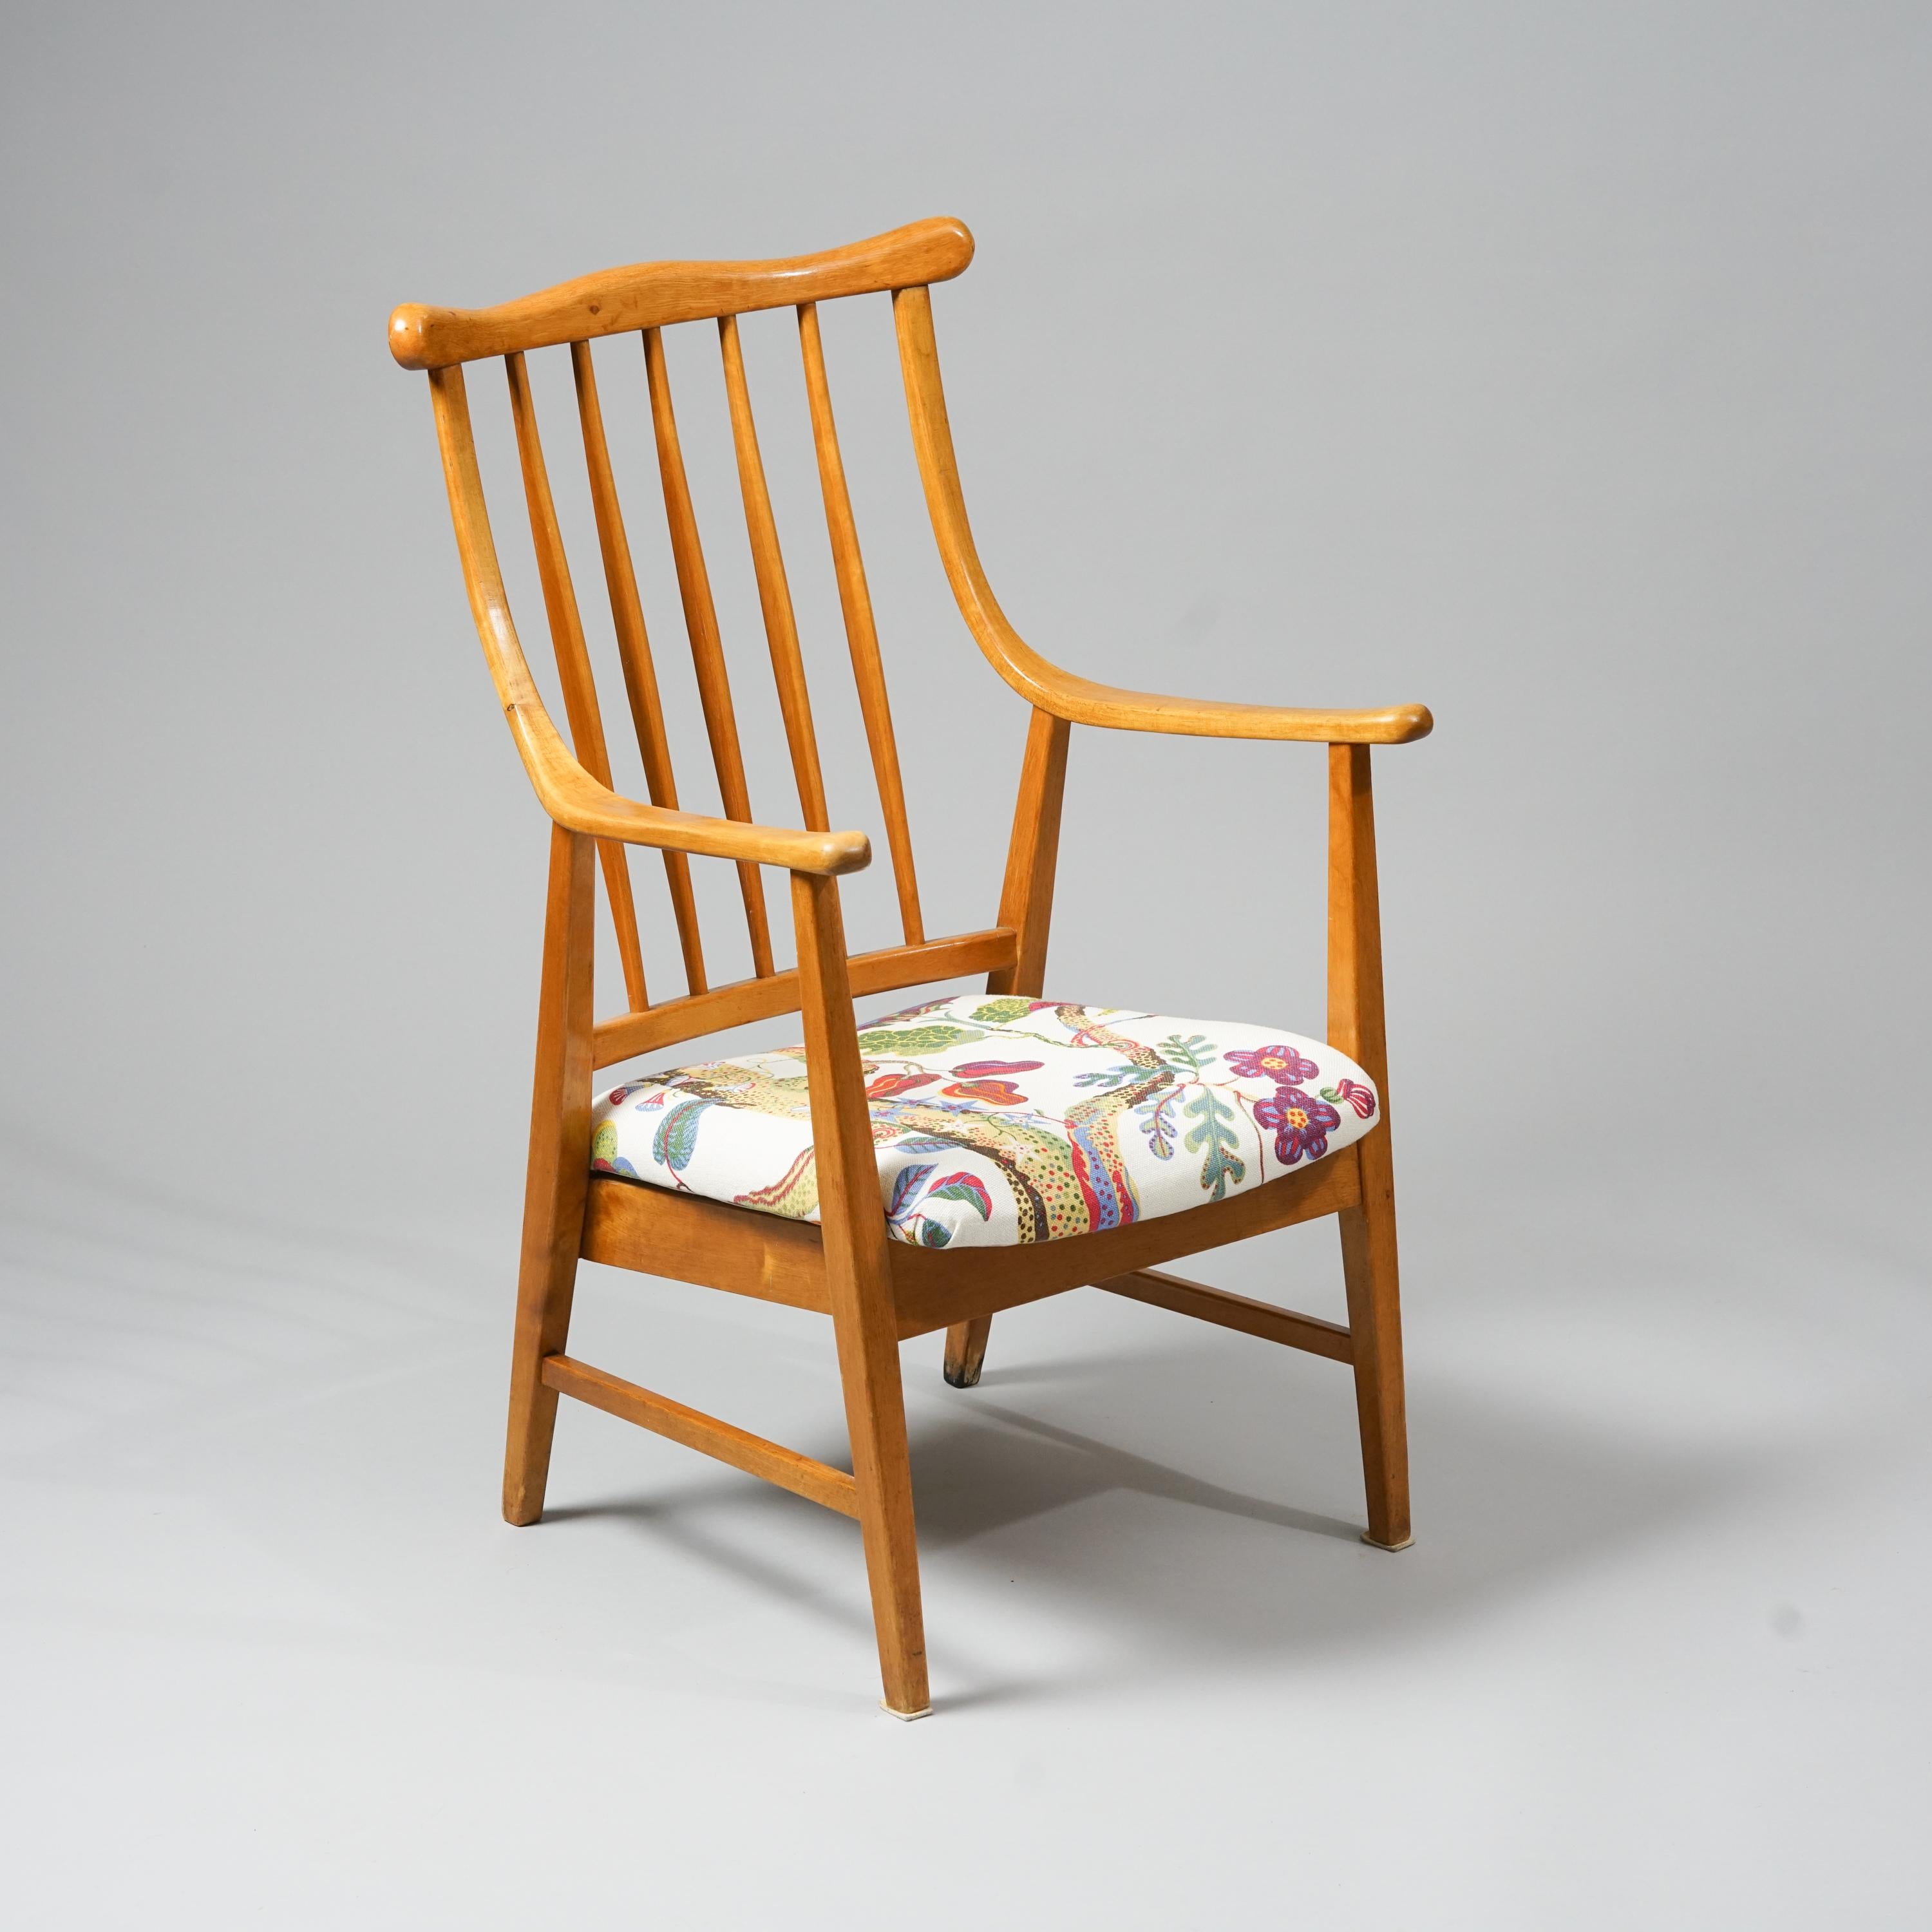 Scandinavian Mid-Century Modern light armchair from the 1940s, birch frame, re-upholstered with Josef Franks Vegetable Tree -fabric, armchair frame has been restored. Good vintage condition.